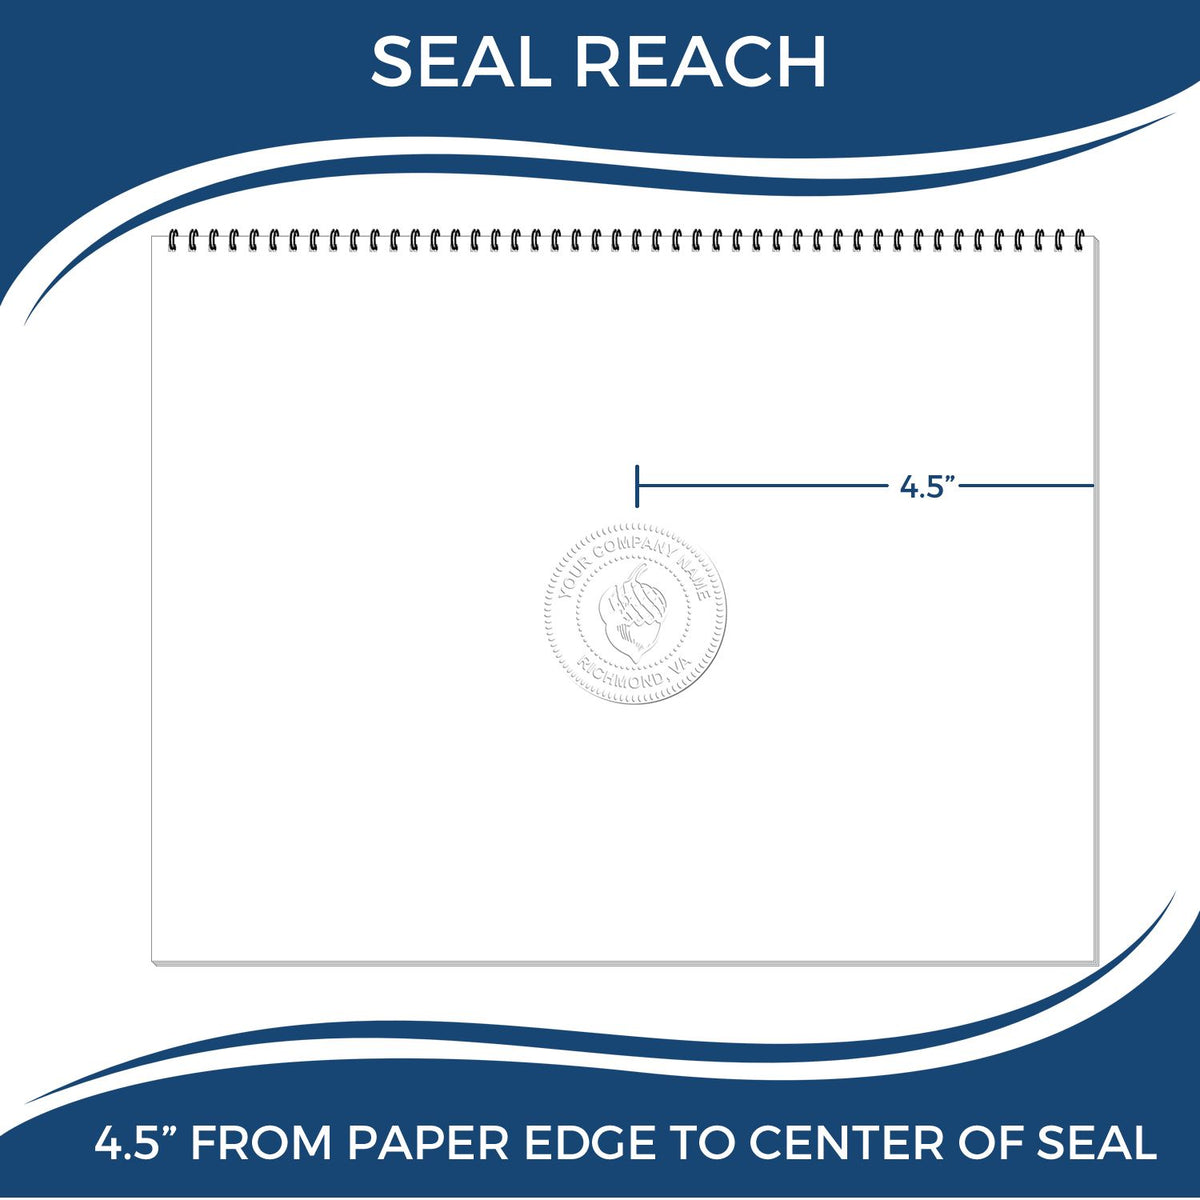 An infographic showing the seal reach which is represented by a ruler and a miniature seal image of the State of Wisconsin Extended Long Reach Geologist Seal